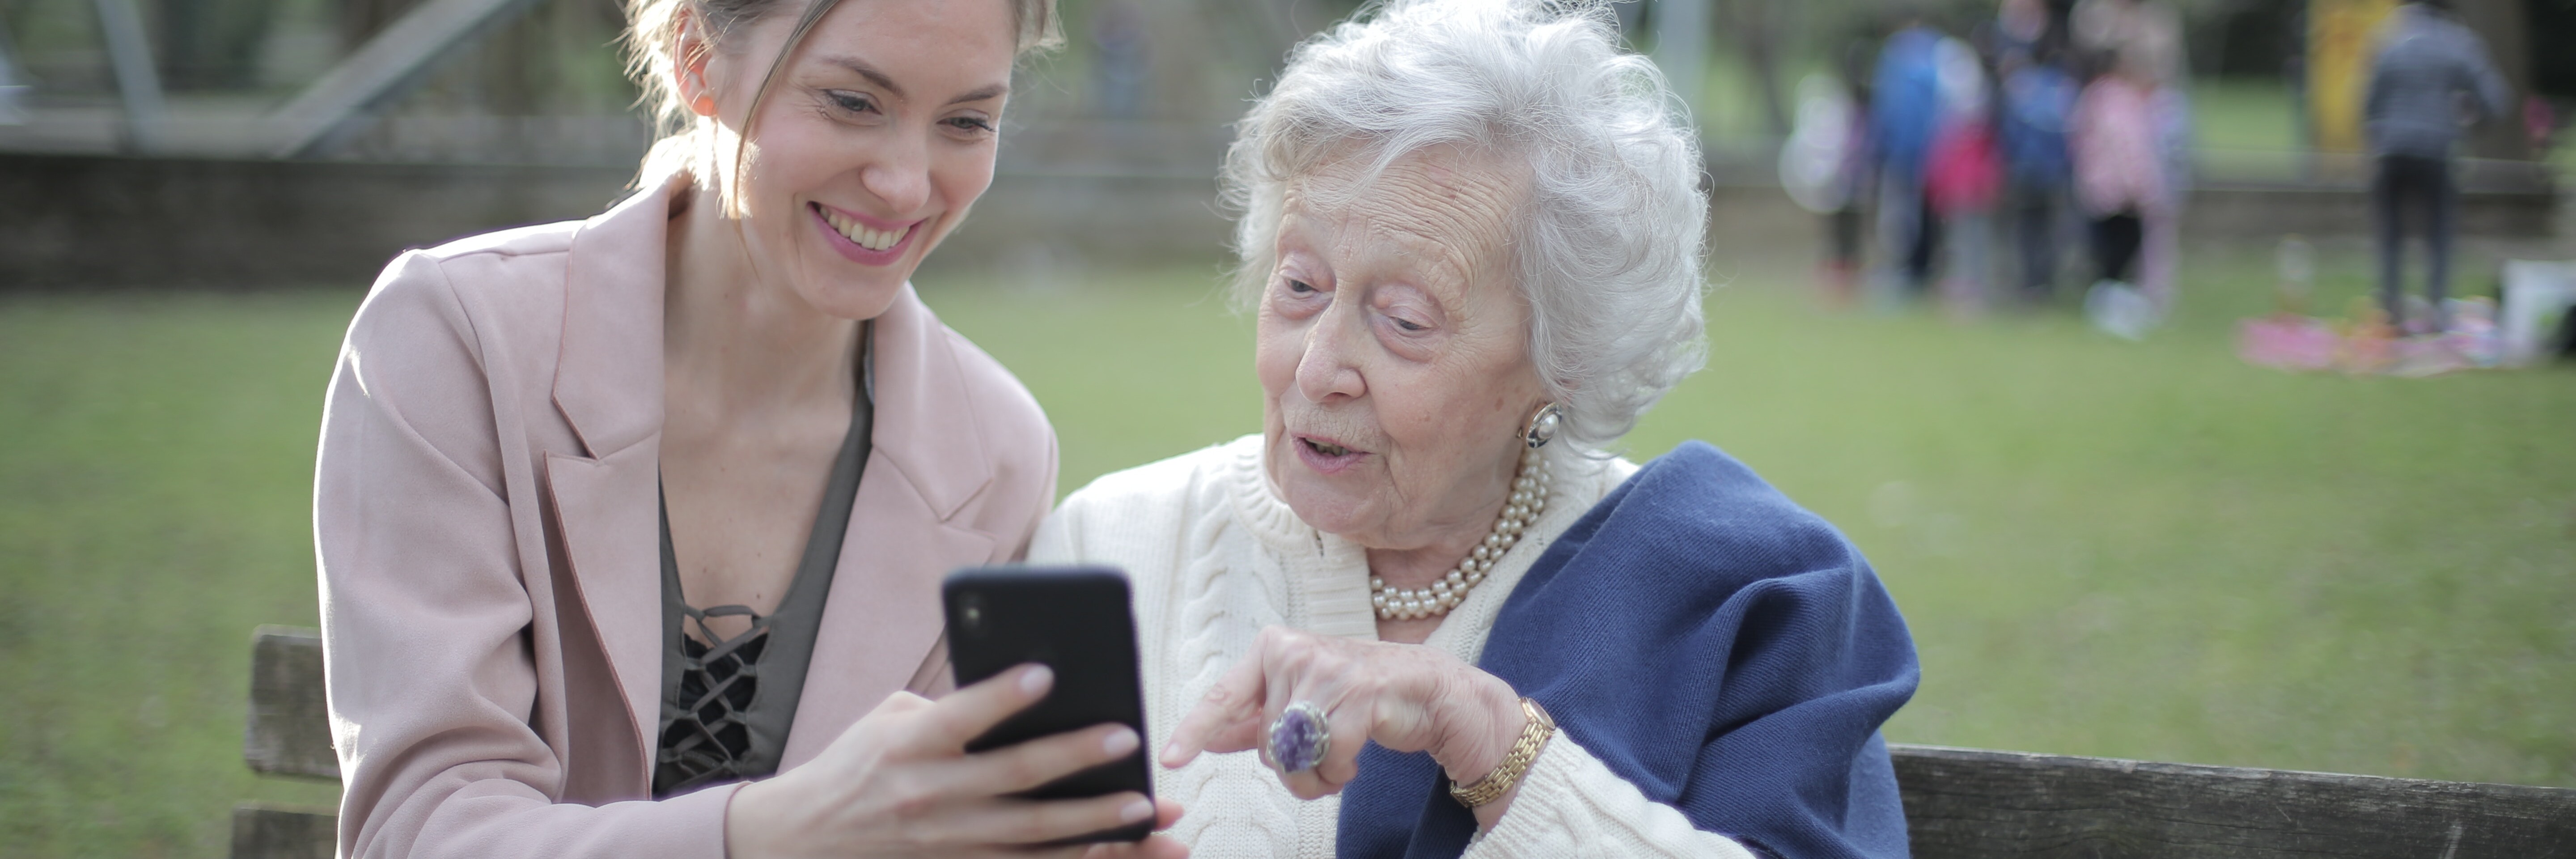 Caregiver and elderly woman looking at a phone